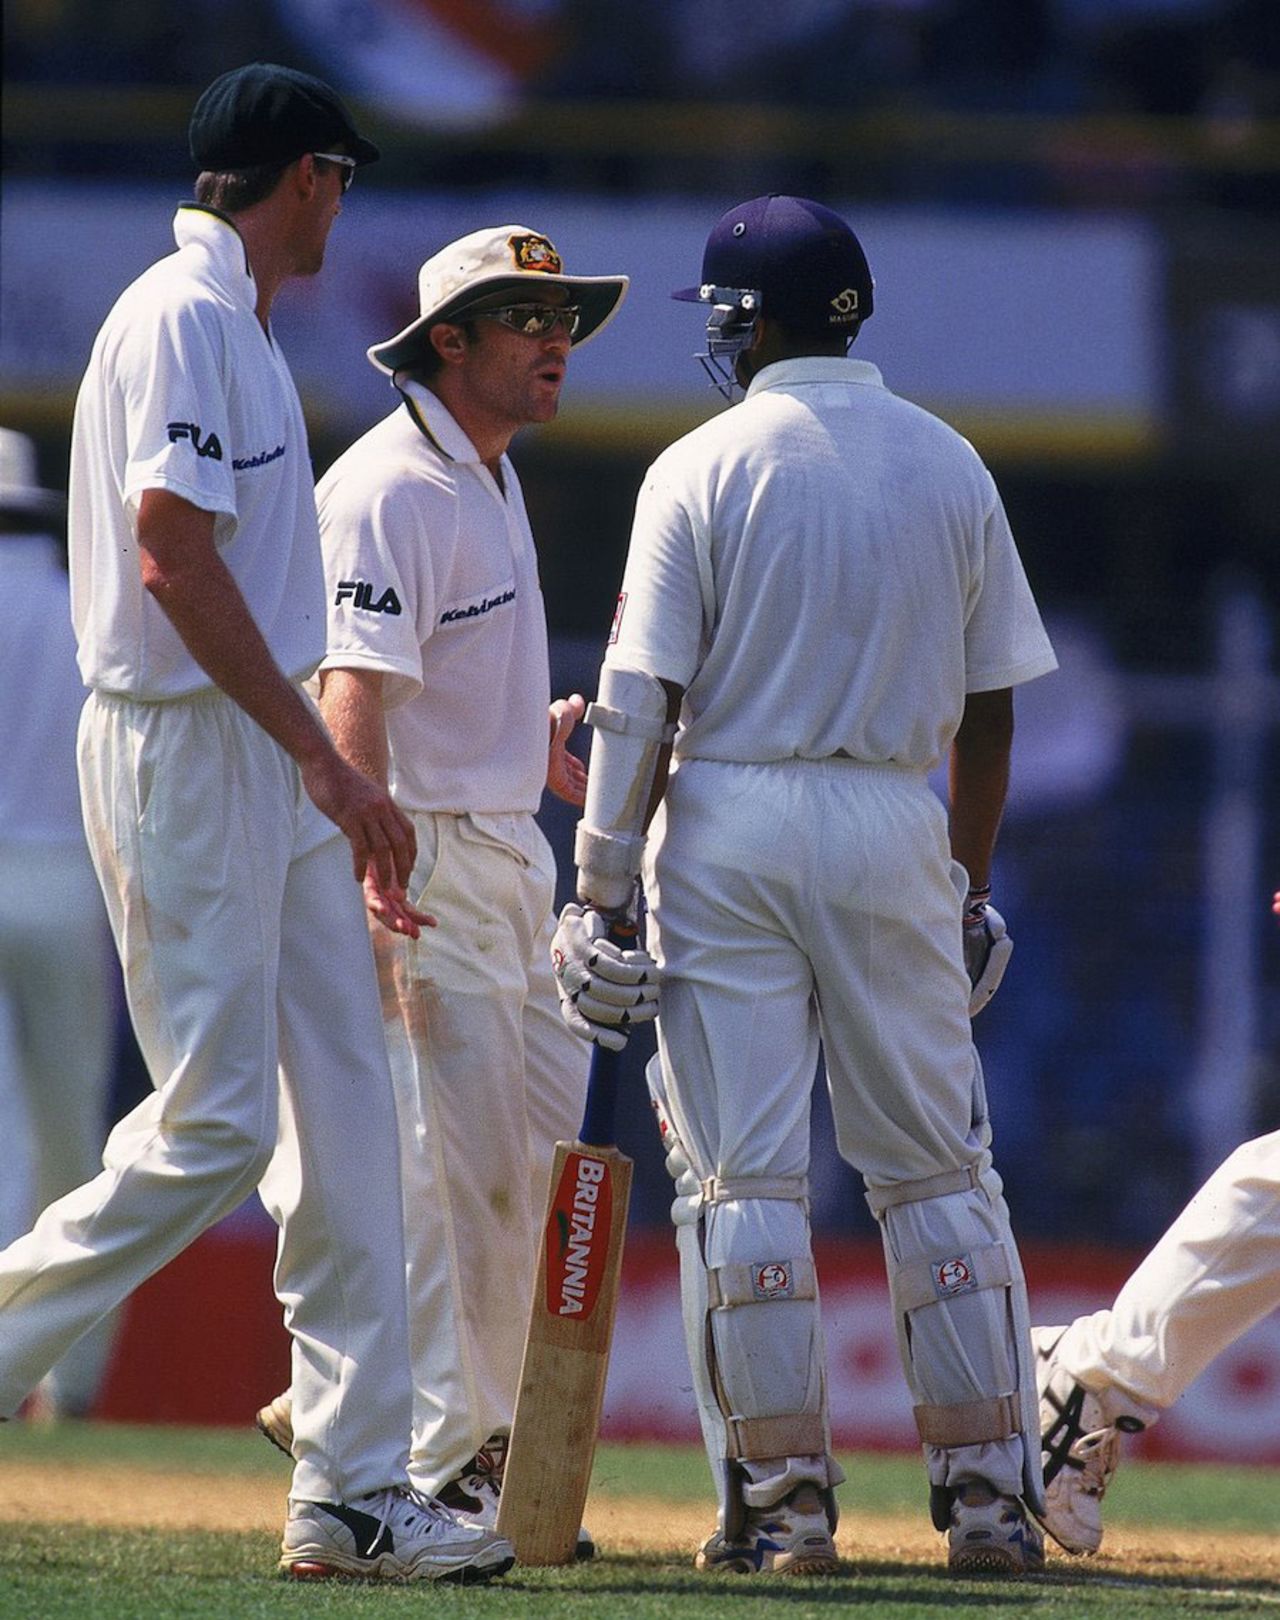 Michael Slater argues with Rahul Dravid, India v Australia, first Test, Mumbai, 1 March, 2001